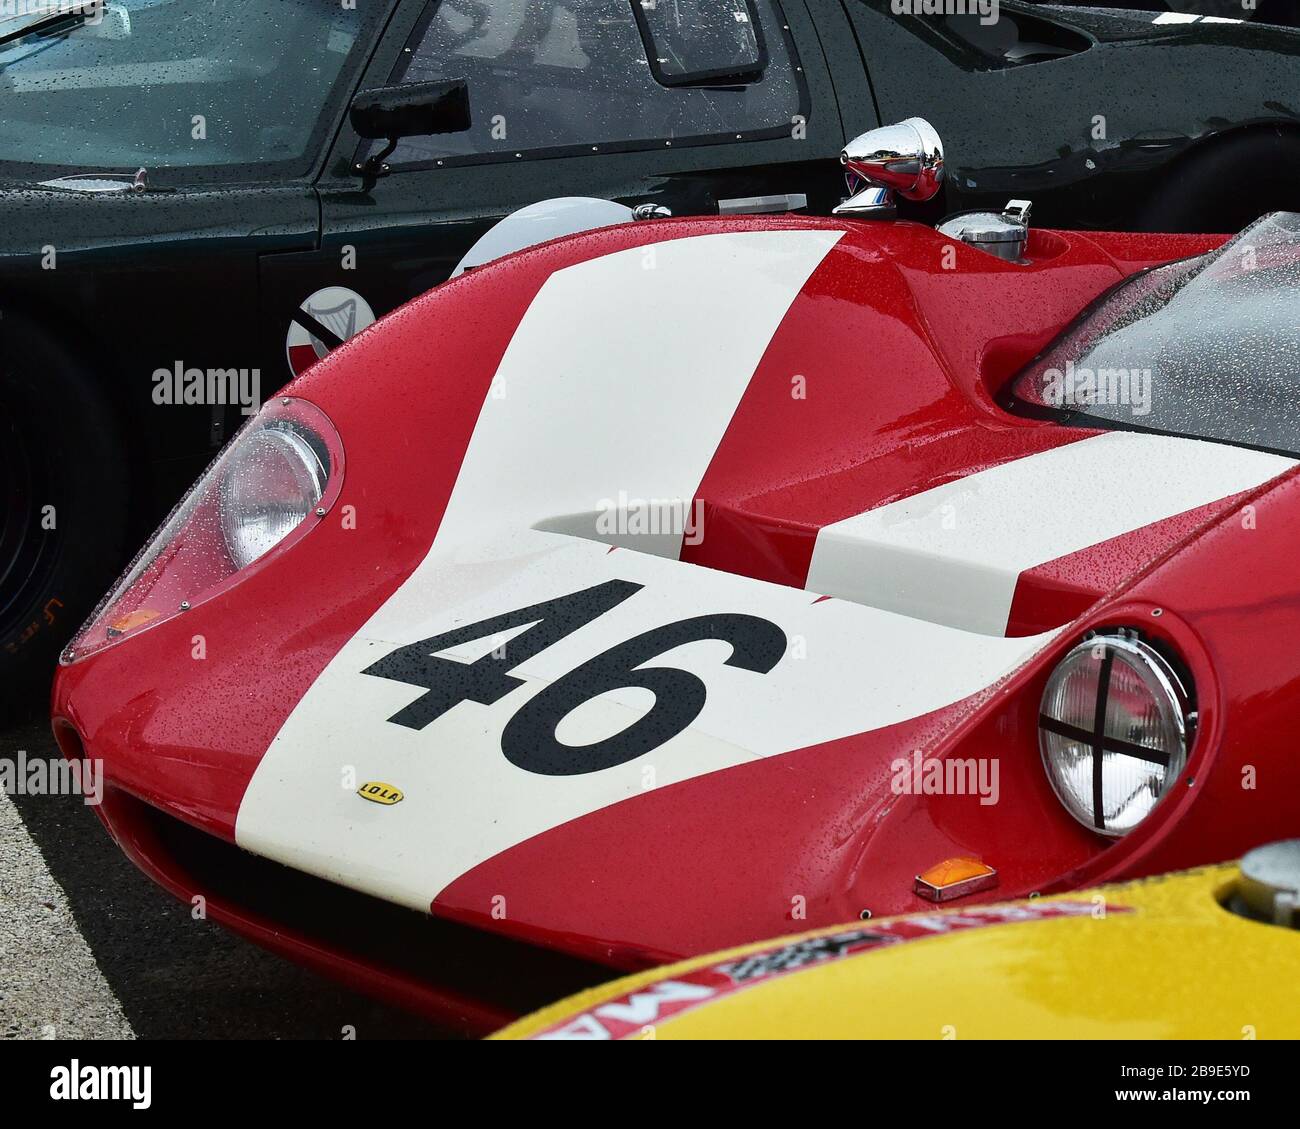 Mike Whitaker, Lola Chevrolet T70 Spyder, Whitsun Trophy, Sports Prototypes, Goodwood Revival 2017, September 2017, automobiles, cars, circuit racing, Stock Photo